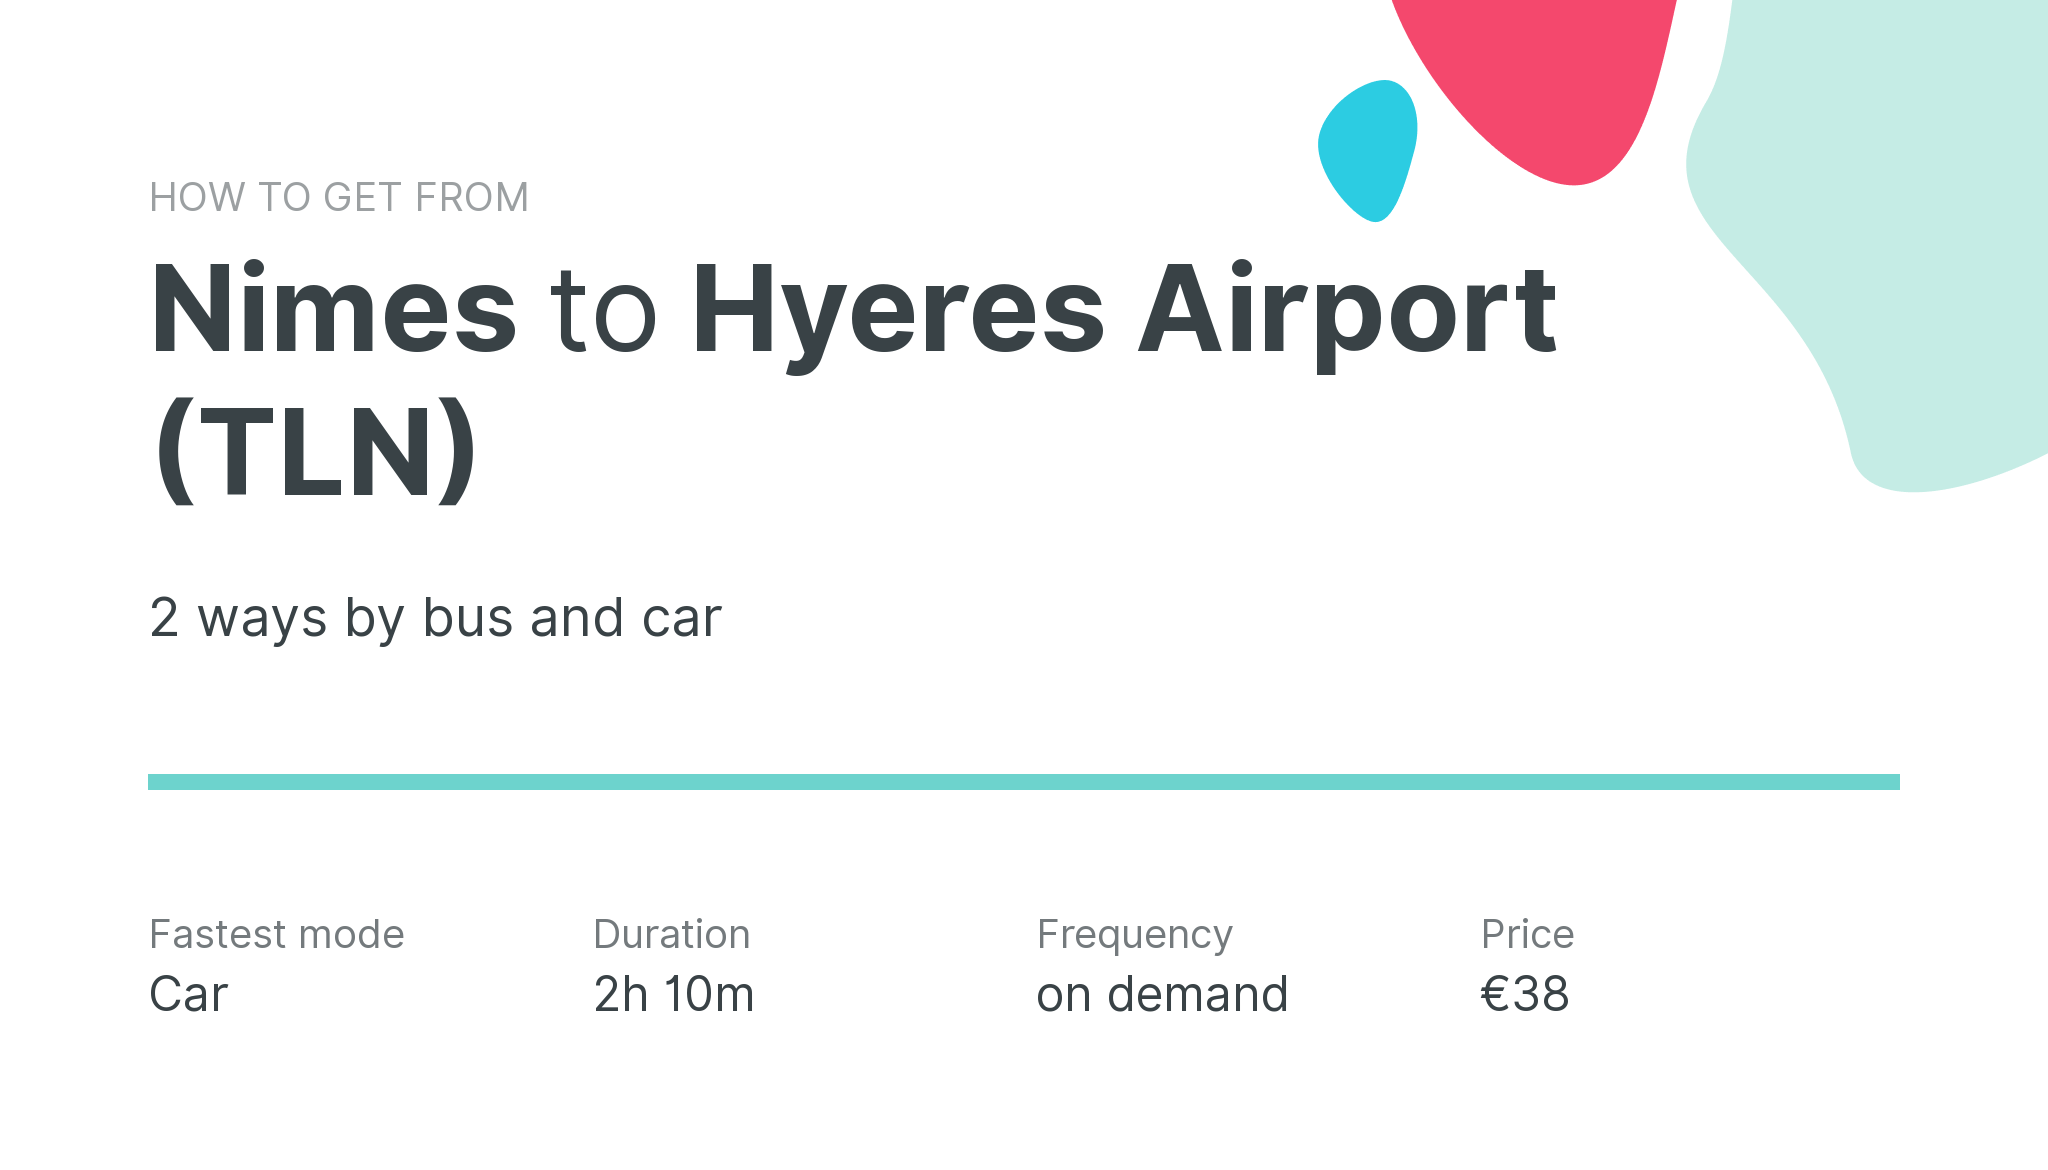 How do I get from Nimes to Hyeres Airport (TLN)